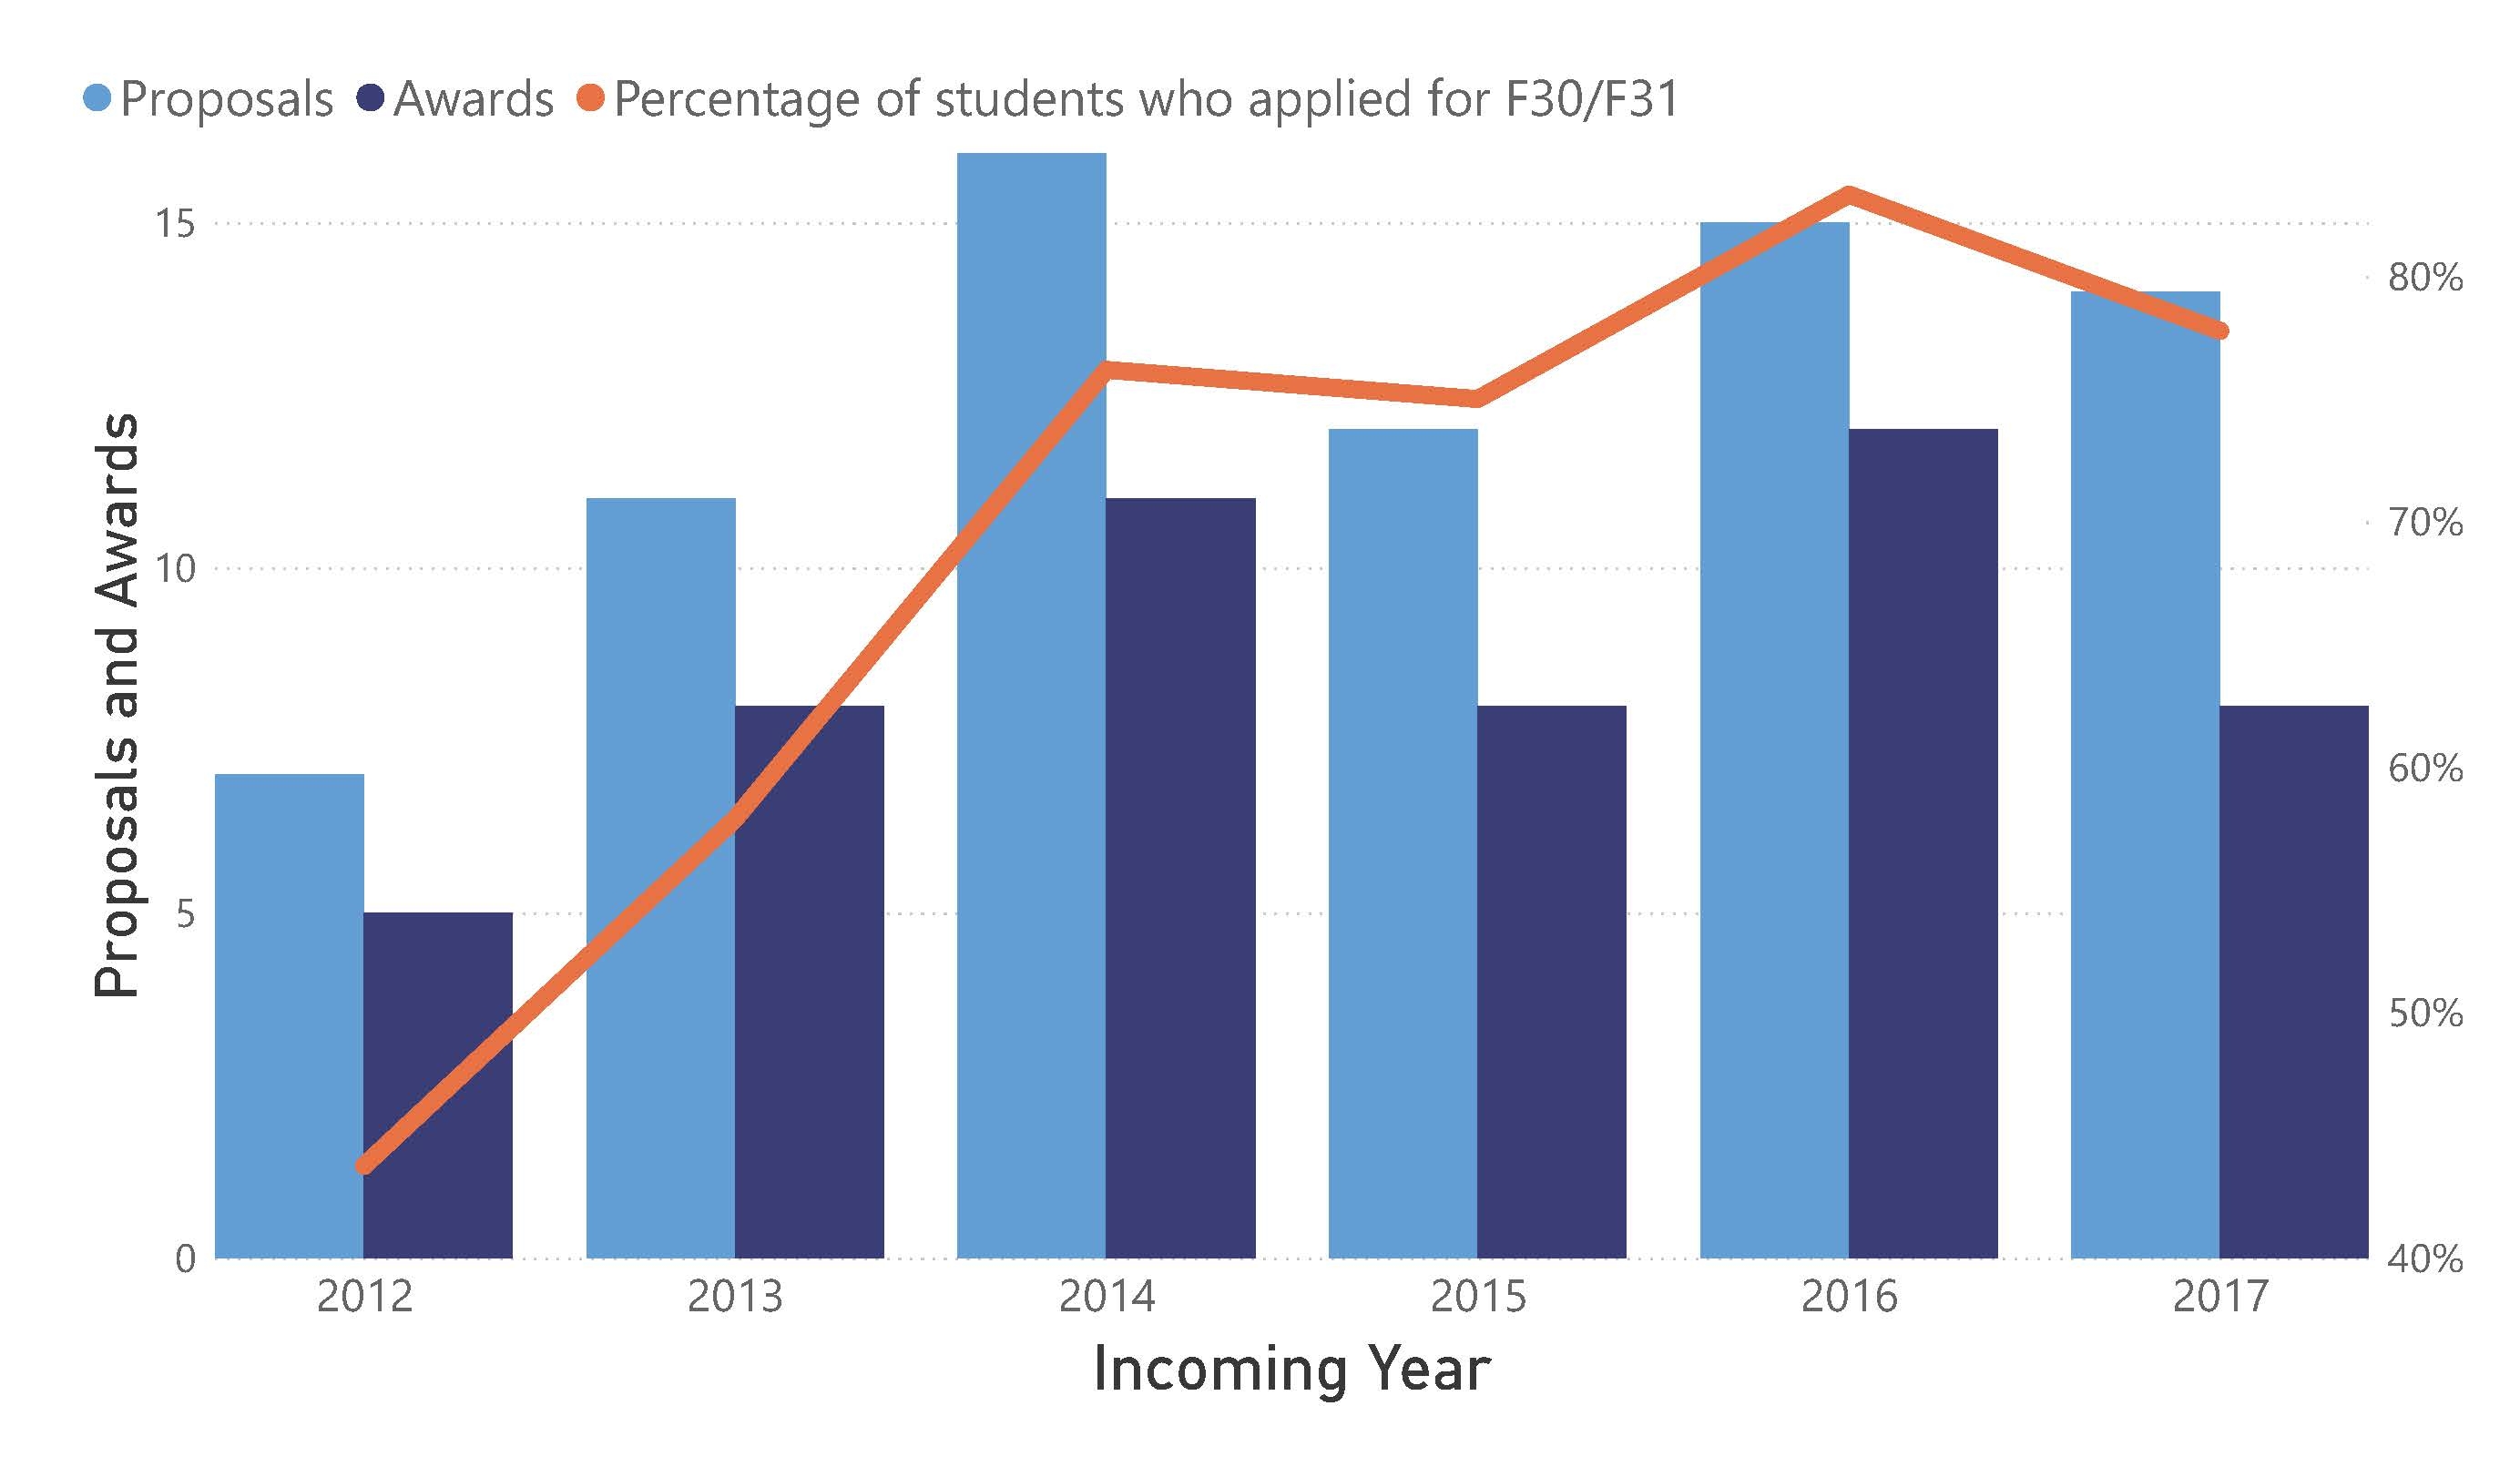 Graph of proposals, awards, and proposals per student for incoming class years 2012-2017.